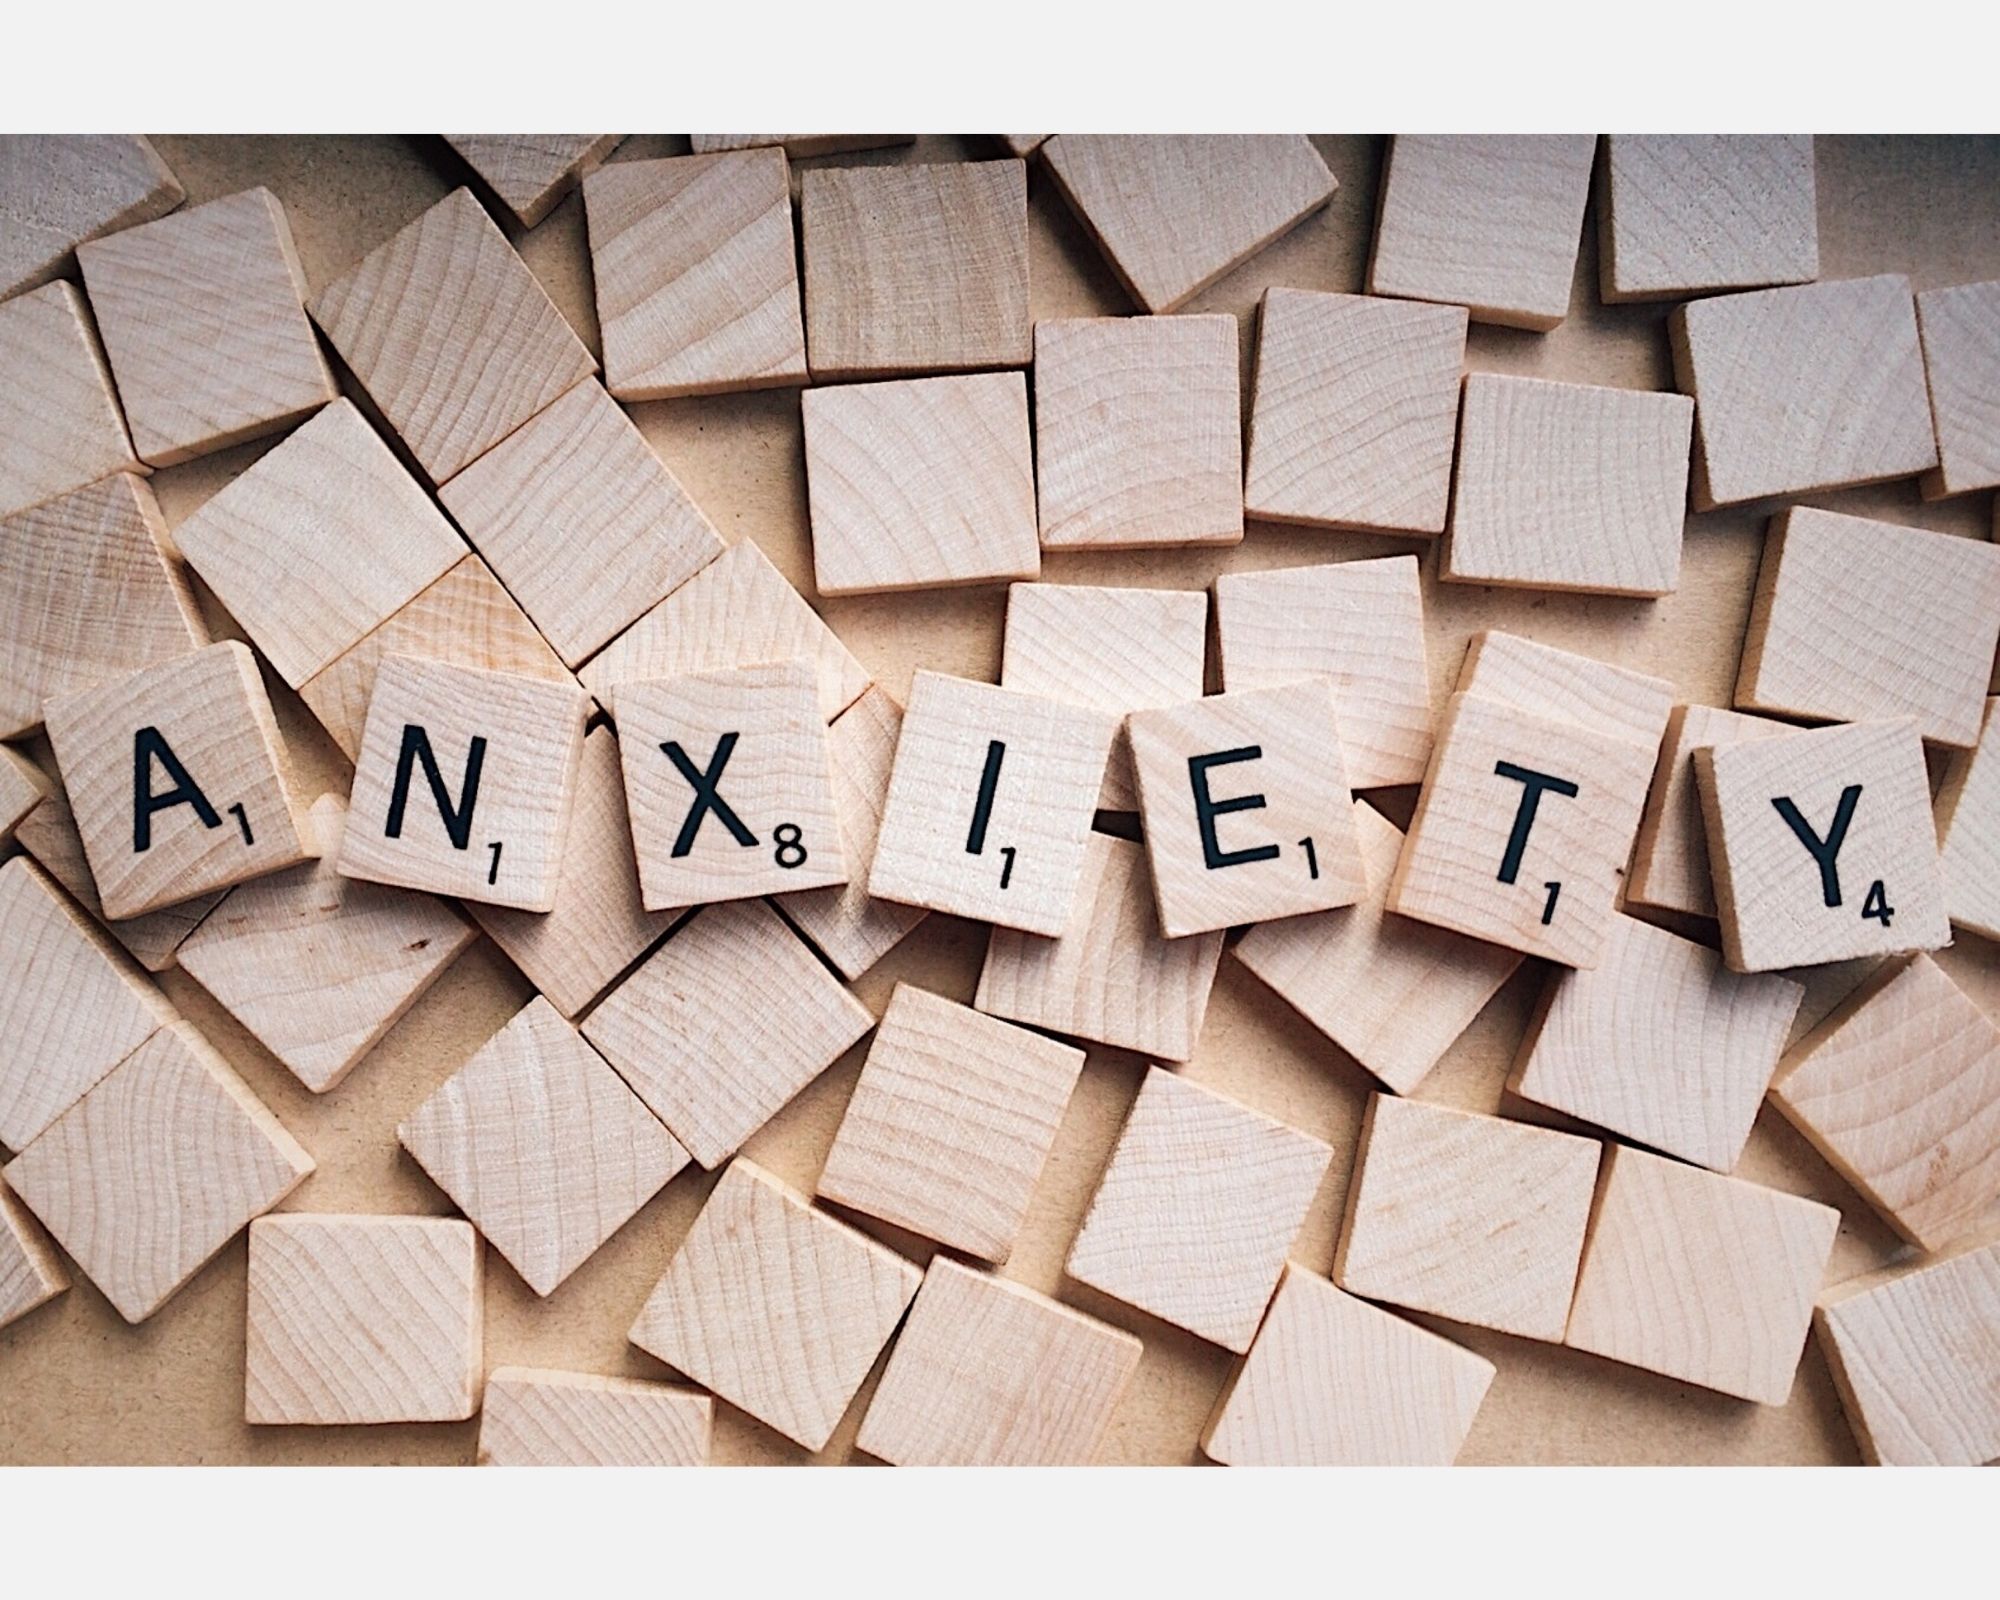 Anxiety spelled out with Scrabble tiles